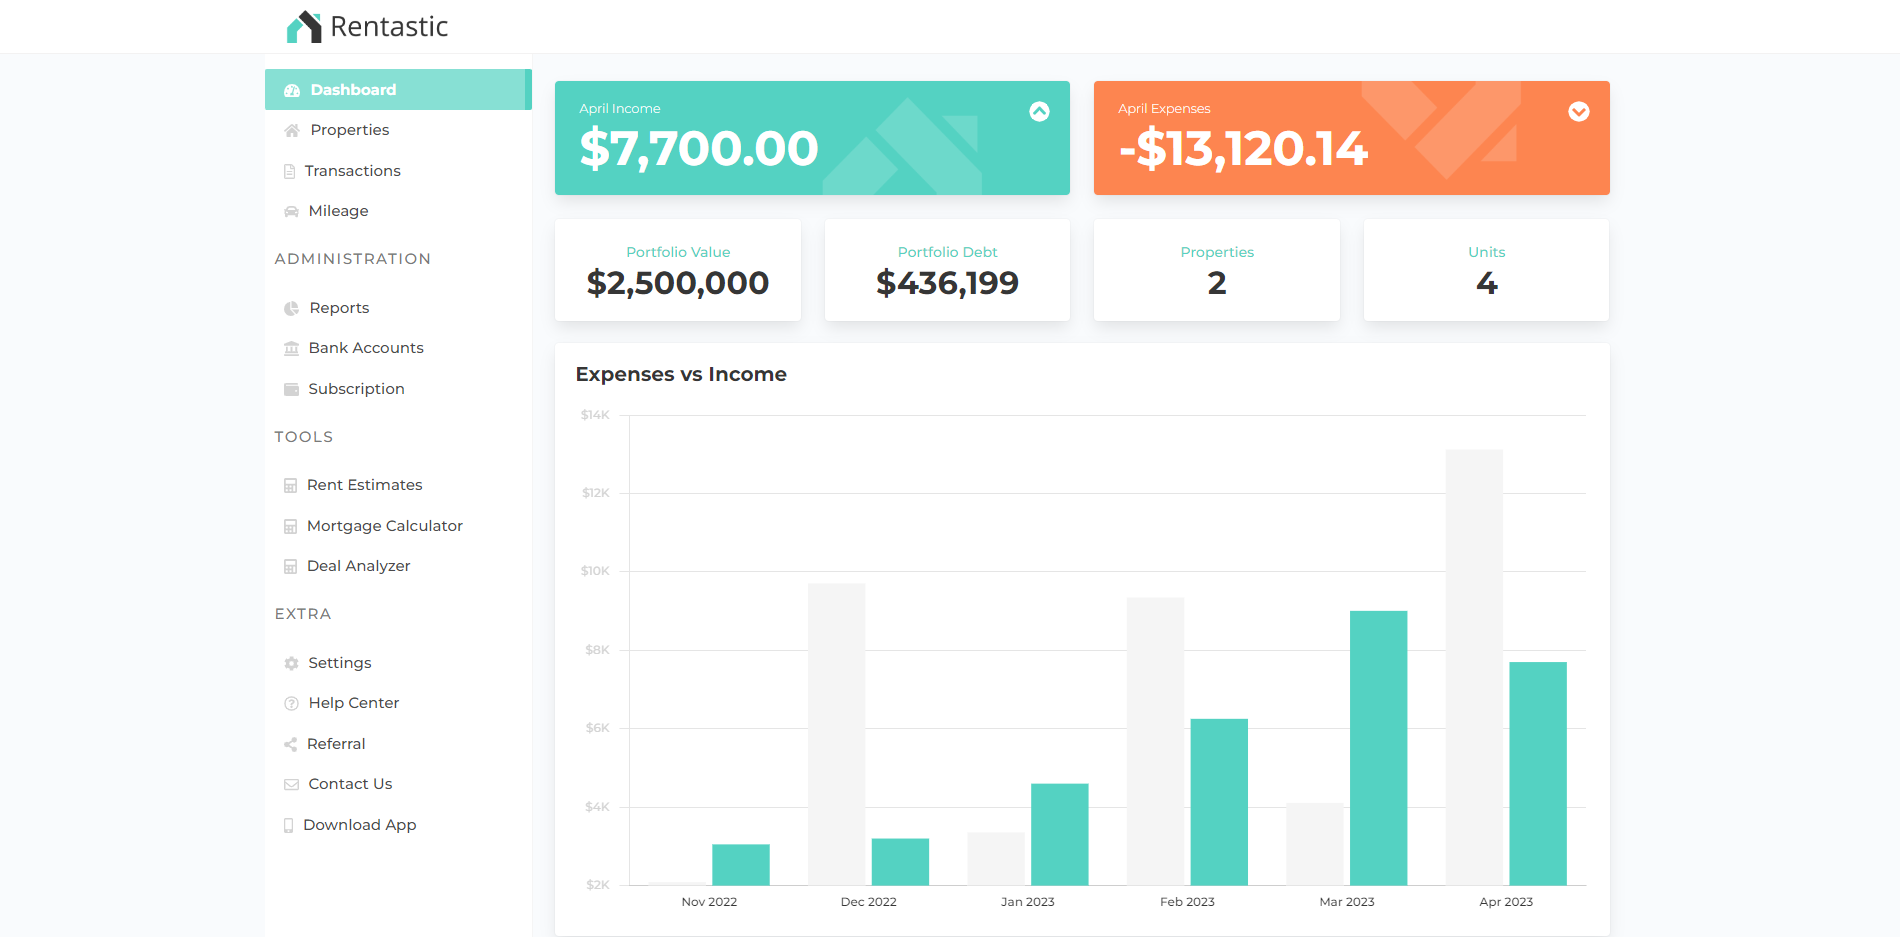 The Dashboard provides a bird's eye view of your property investments. View your monthly income and expenses, portfolio value and debt, and the overall portfolio details. View two quarters worth of expenses and income in an easy-to-view graph.